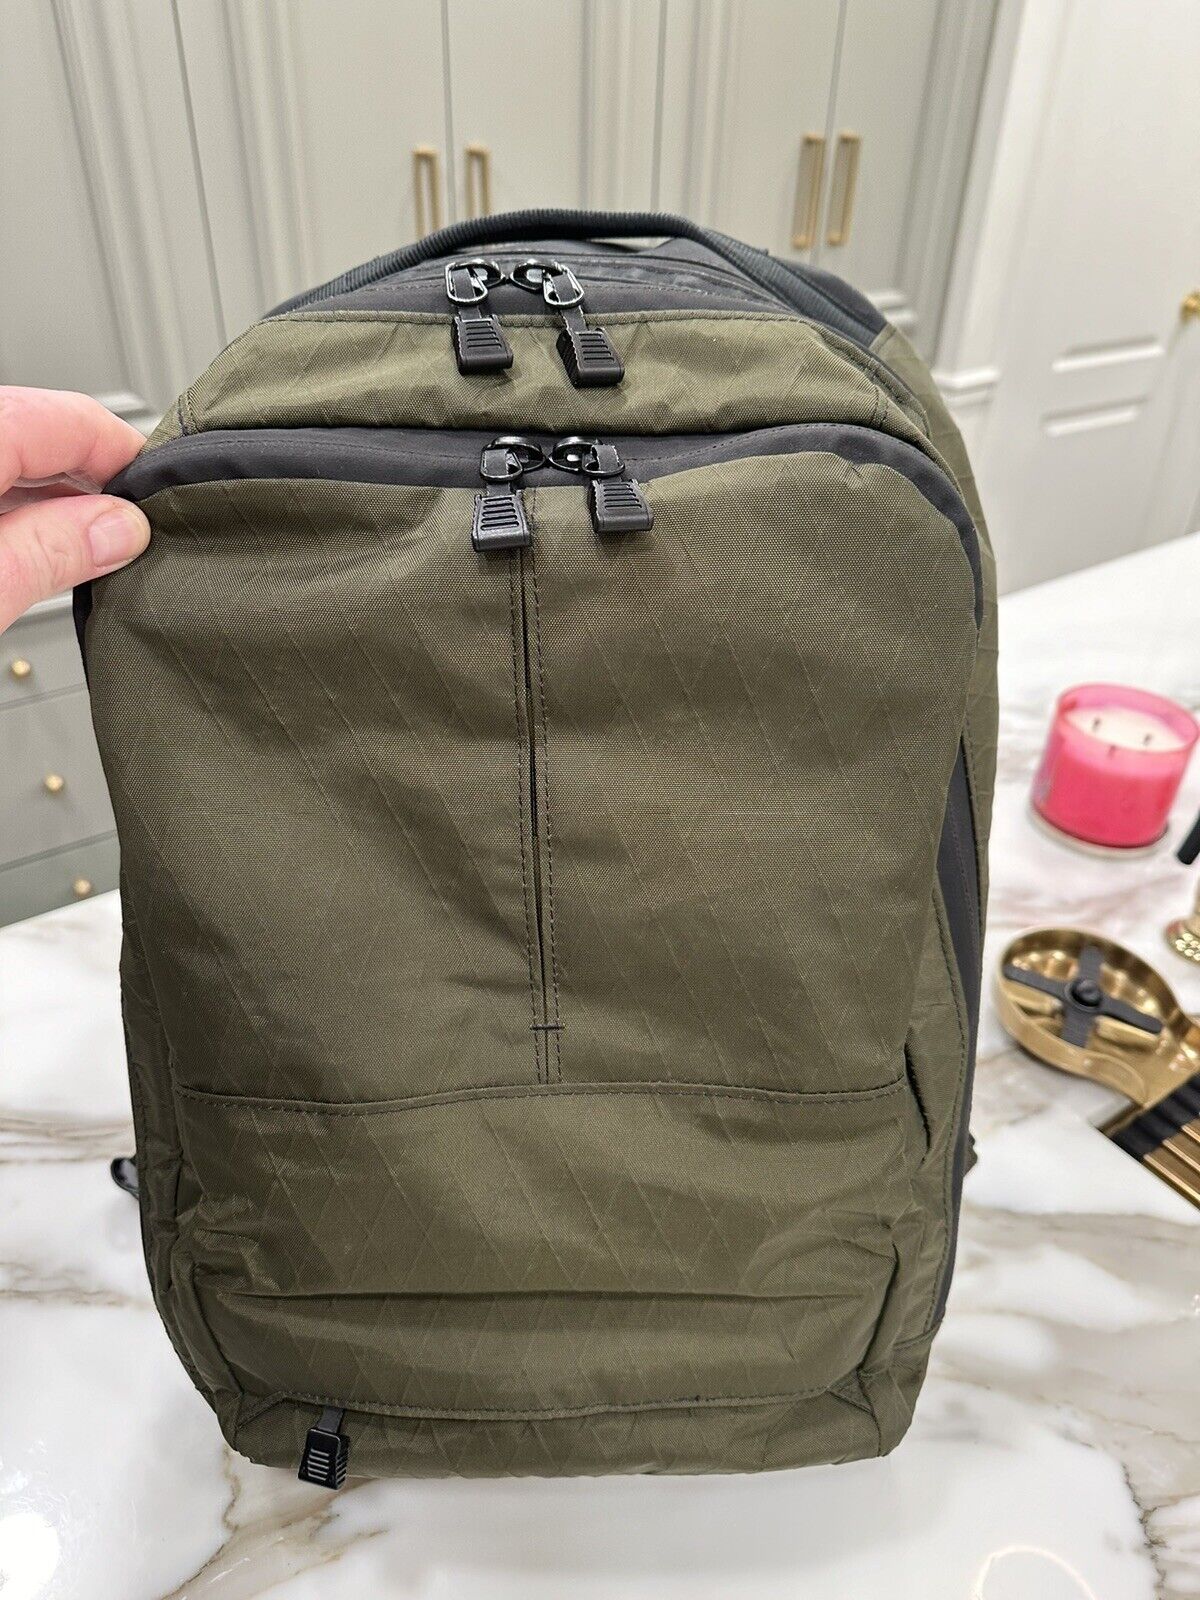 Triple Aught Design TAD Axiom 24 EDC Backpack-Olive Green/+Booster Pods, Rare